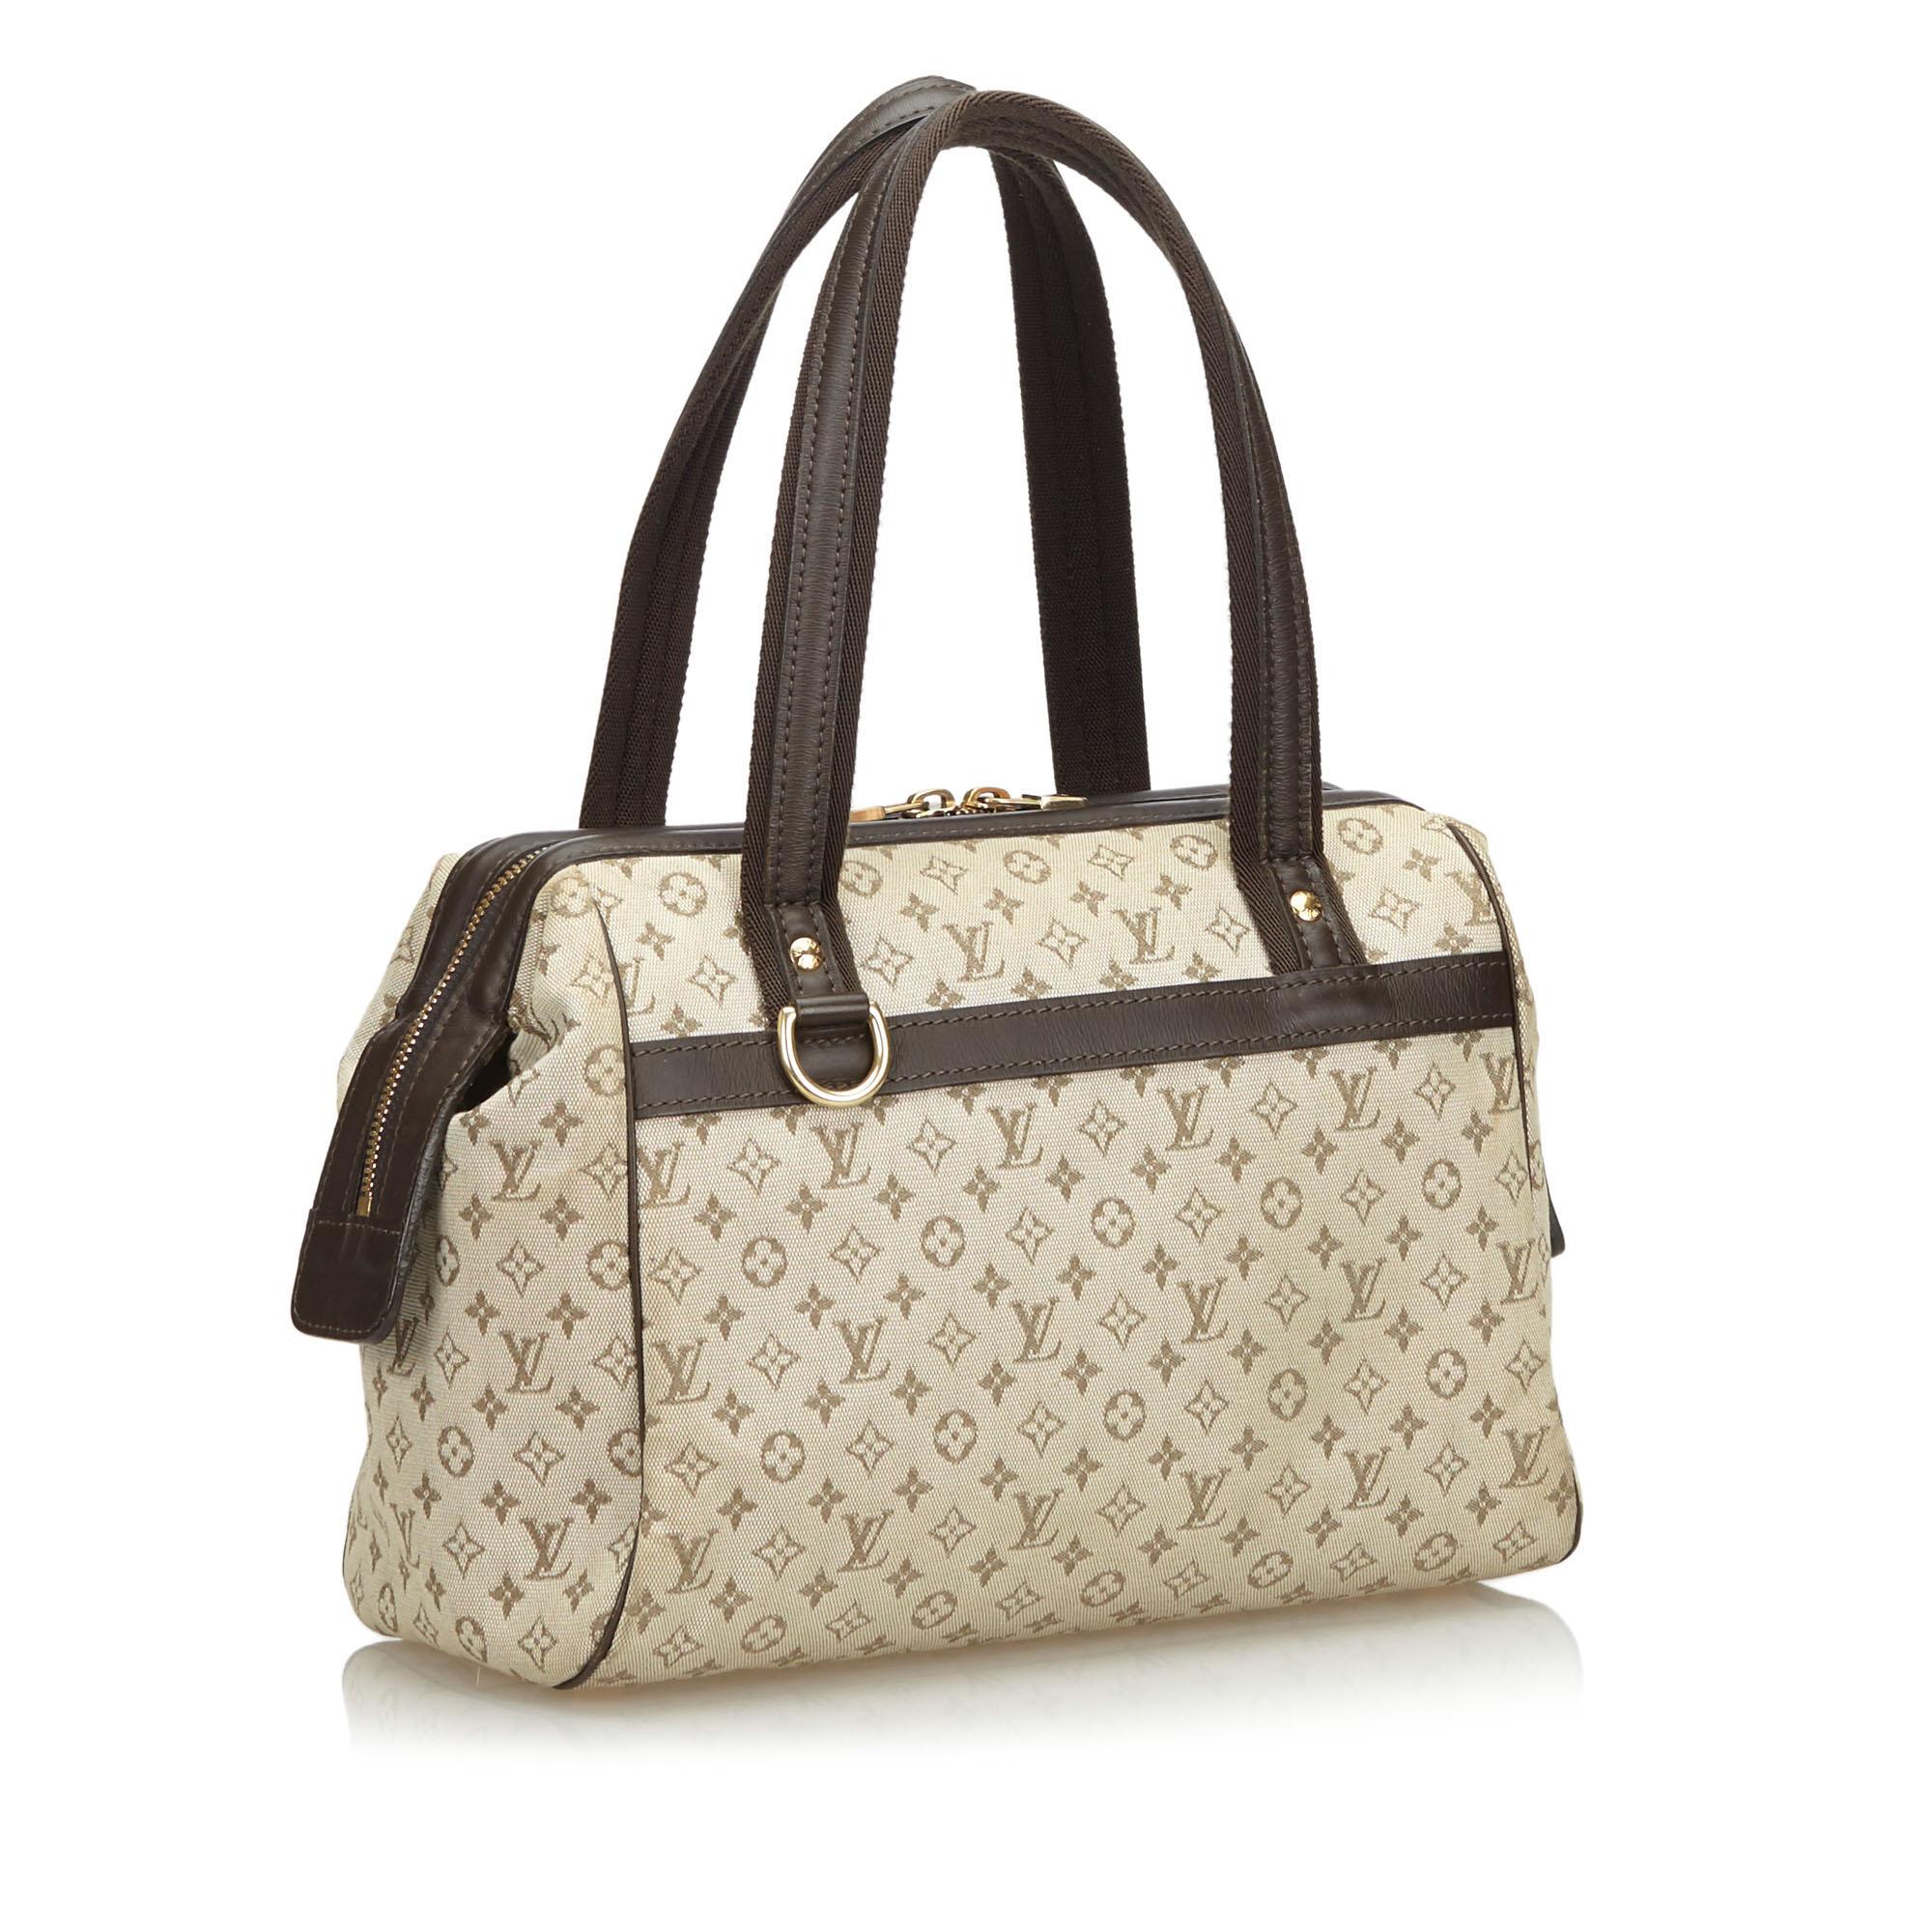 The Josephine PM features the Monogram Mini Lin canvas with leather trim, flat leather straps, a top zip closure, and interior zip and slip pockets. It carries as B+ condition rating.

Inclusions: 
This item does not come with inclusions.


Louis